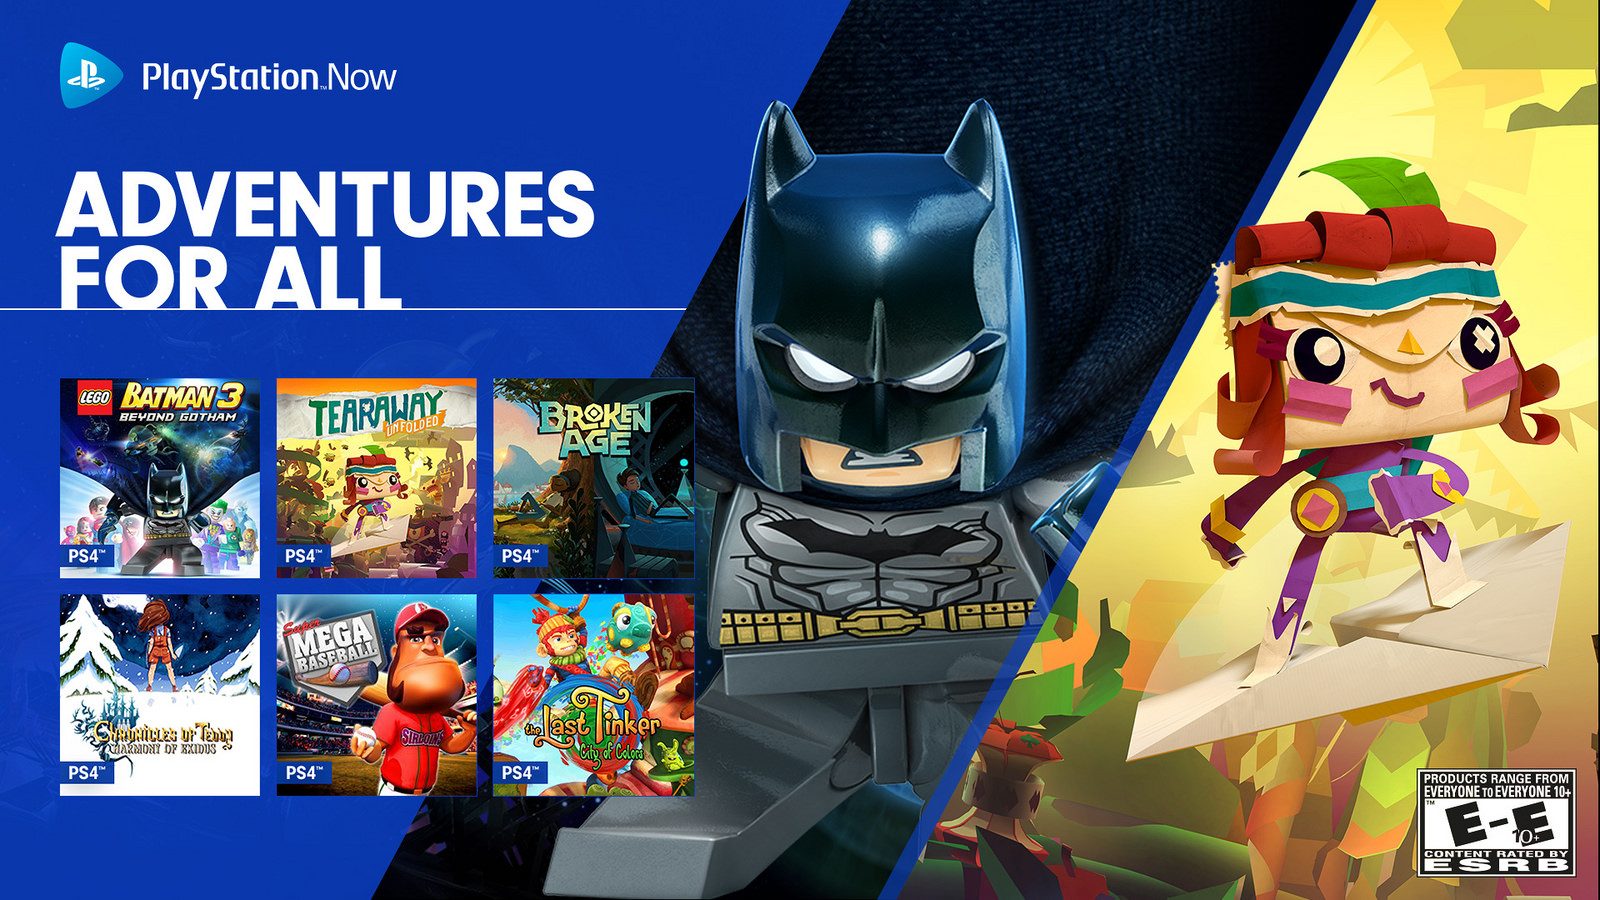 ps4 multiplayer lego games